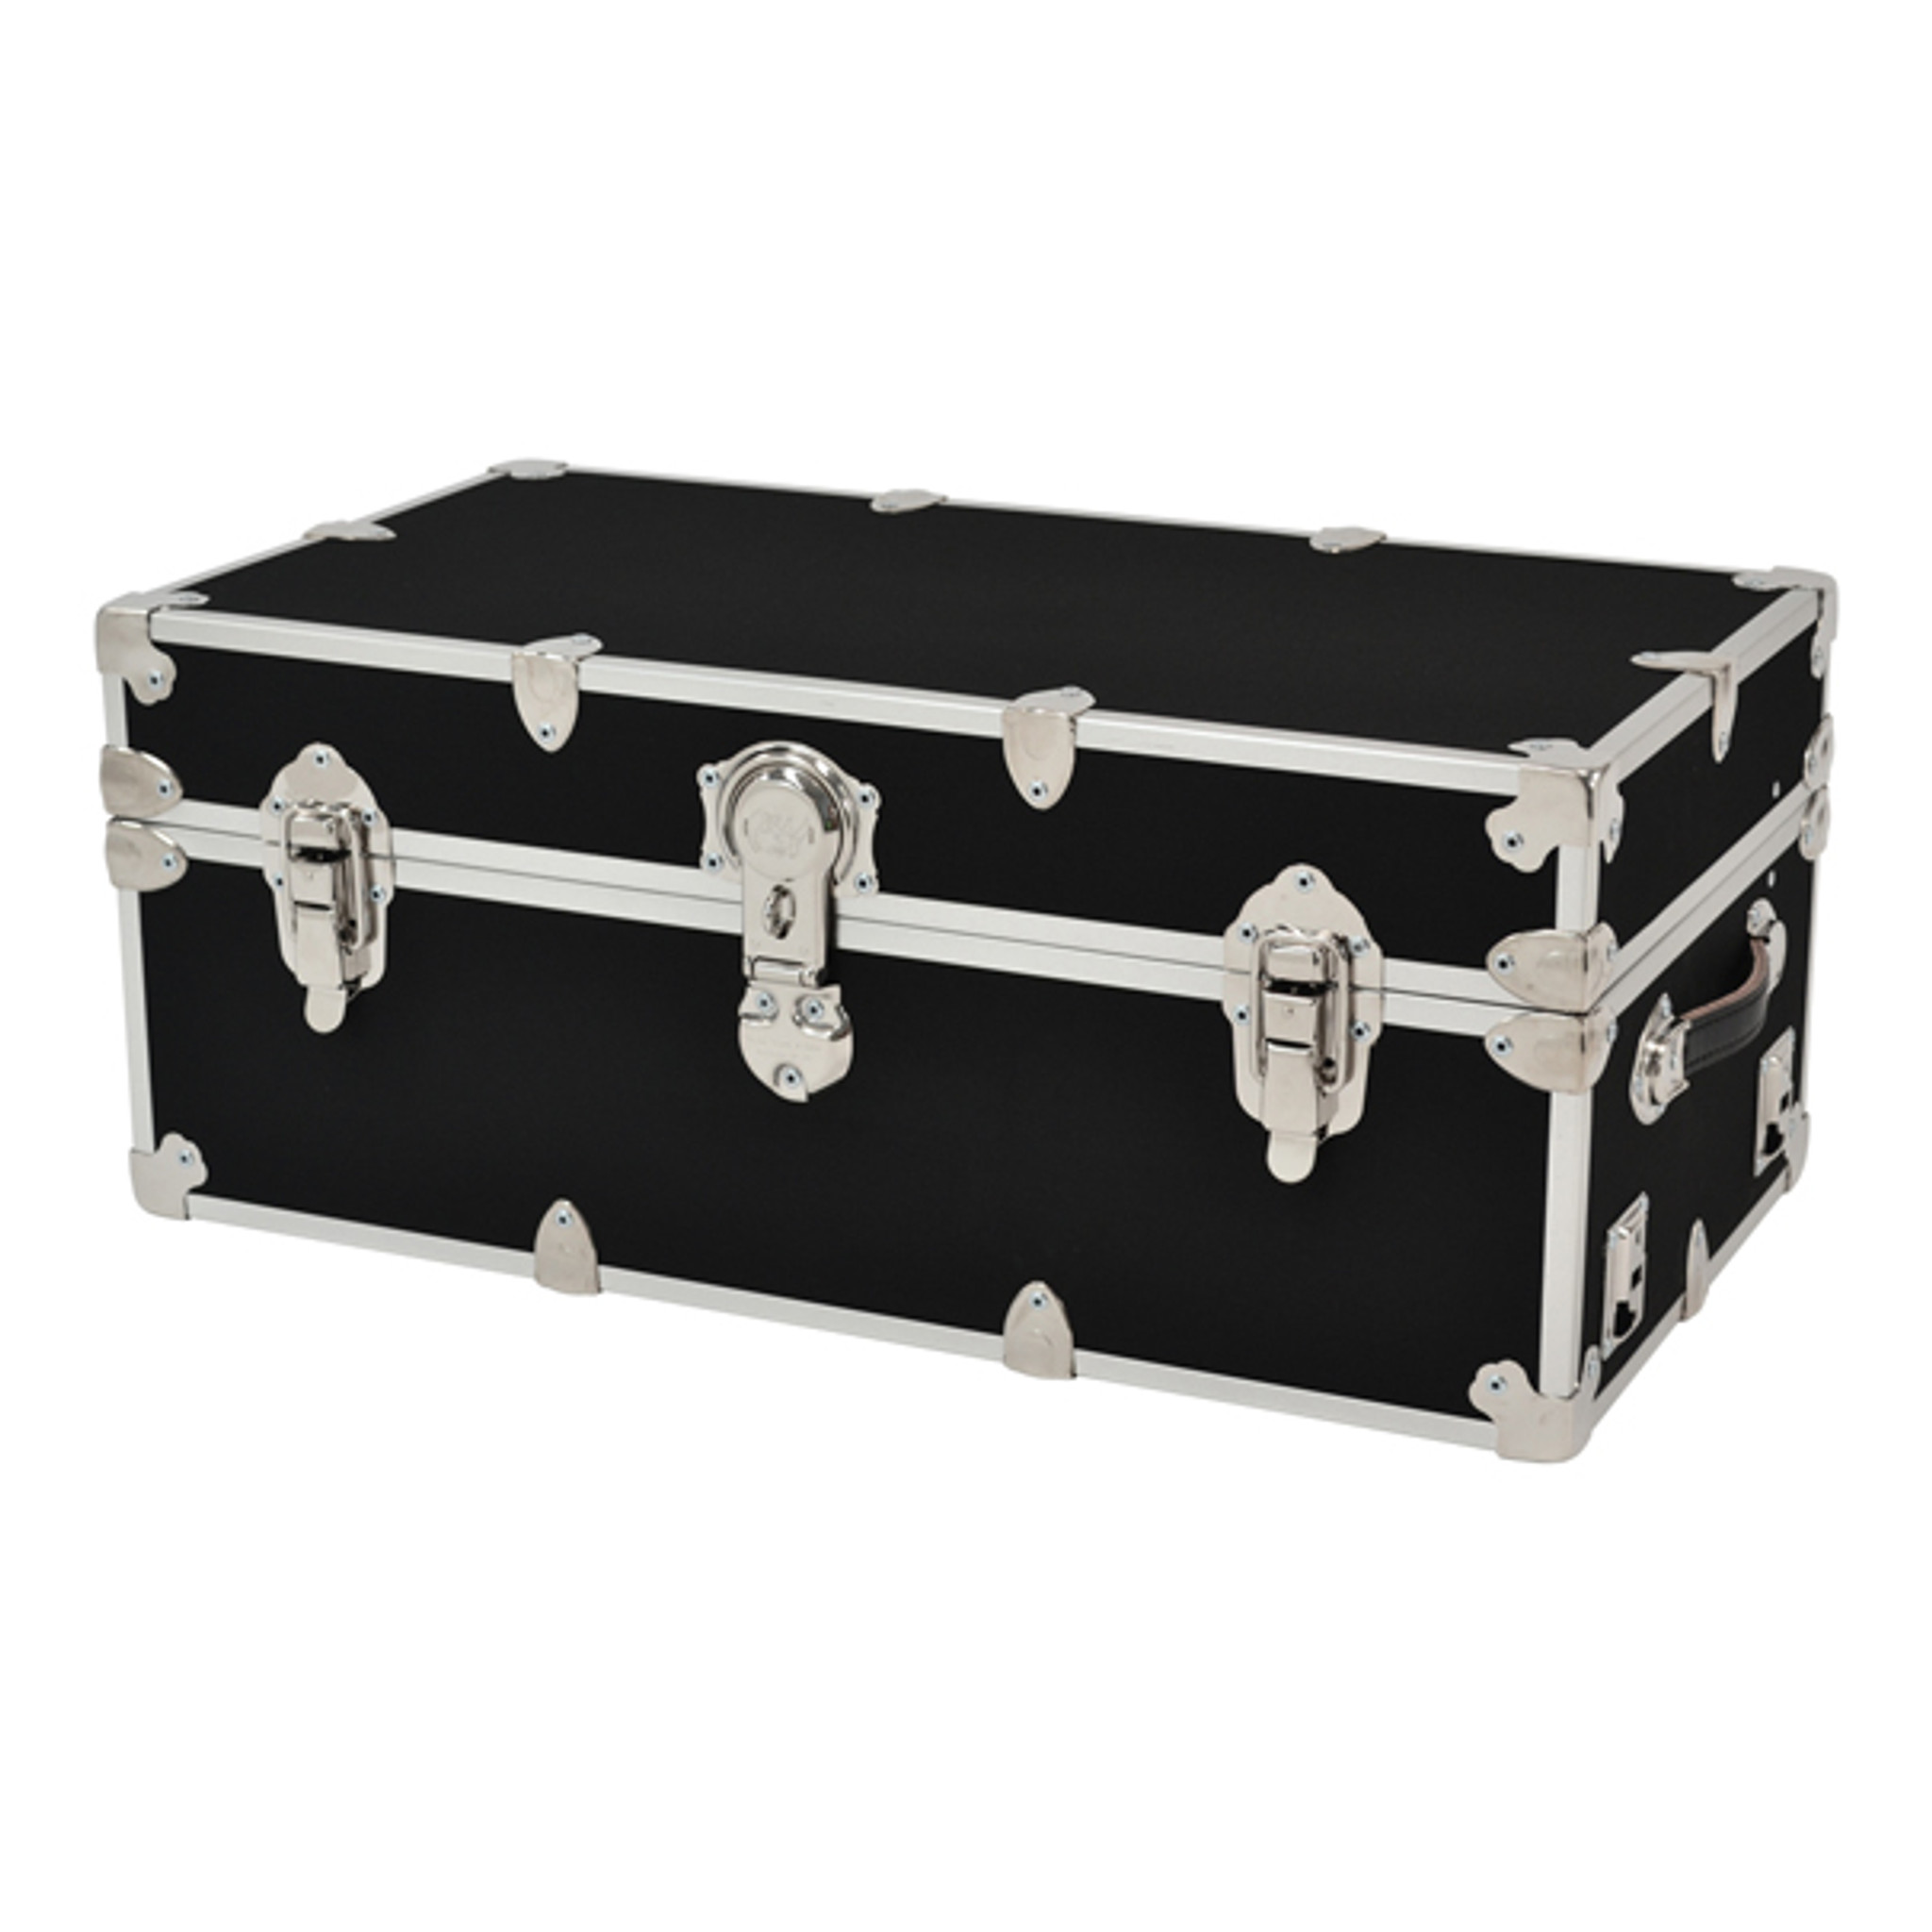 Rhino Traditional Travel Wardrobe Trunk - Trunk Outlet